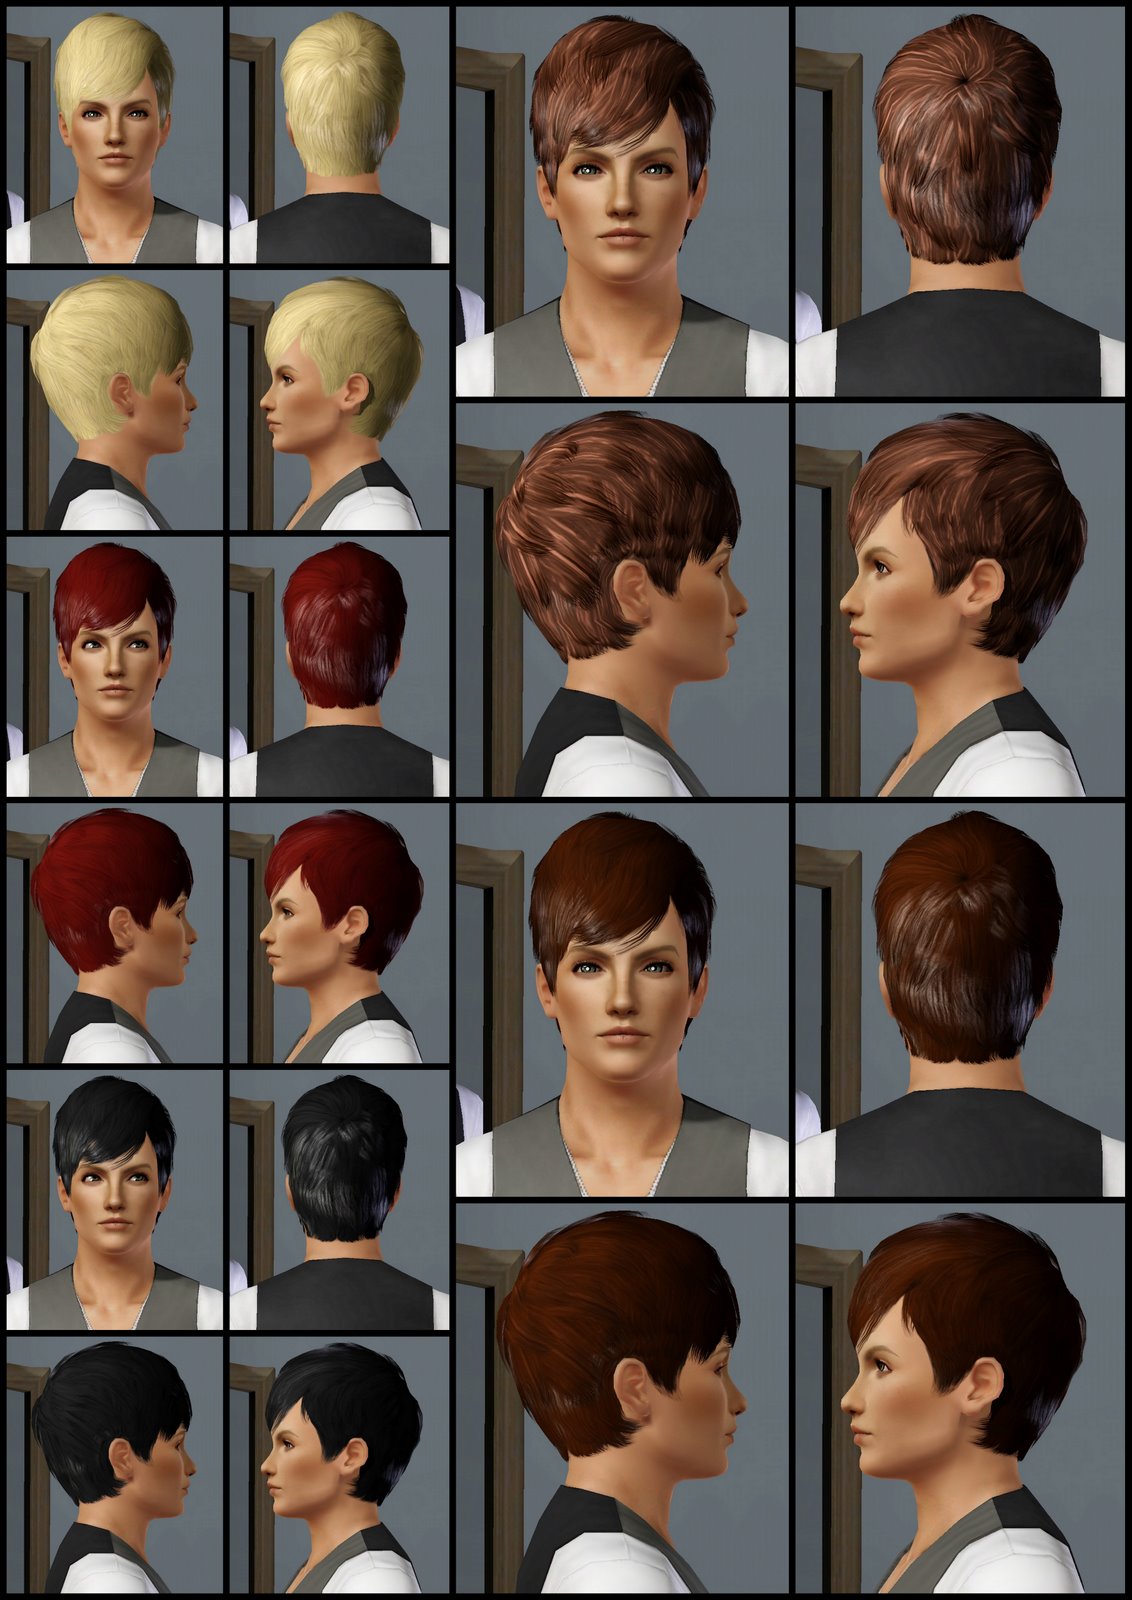 The Sims 3 Store Hair Showroom Riddled Waves Front